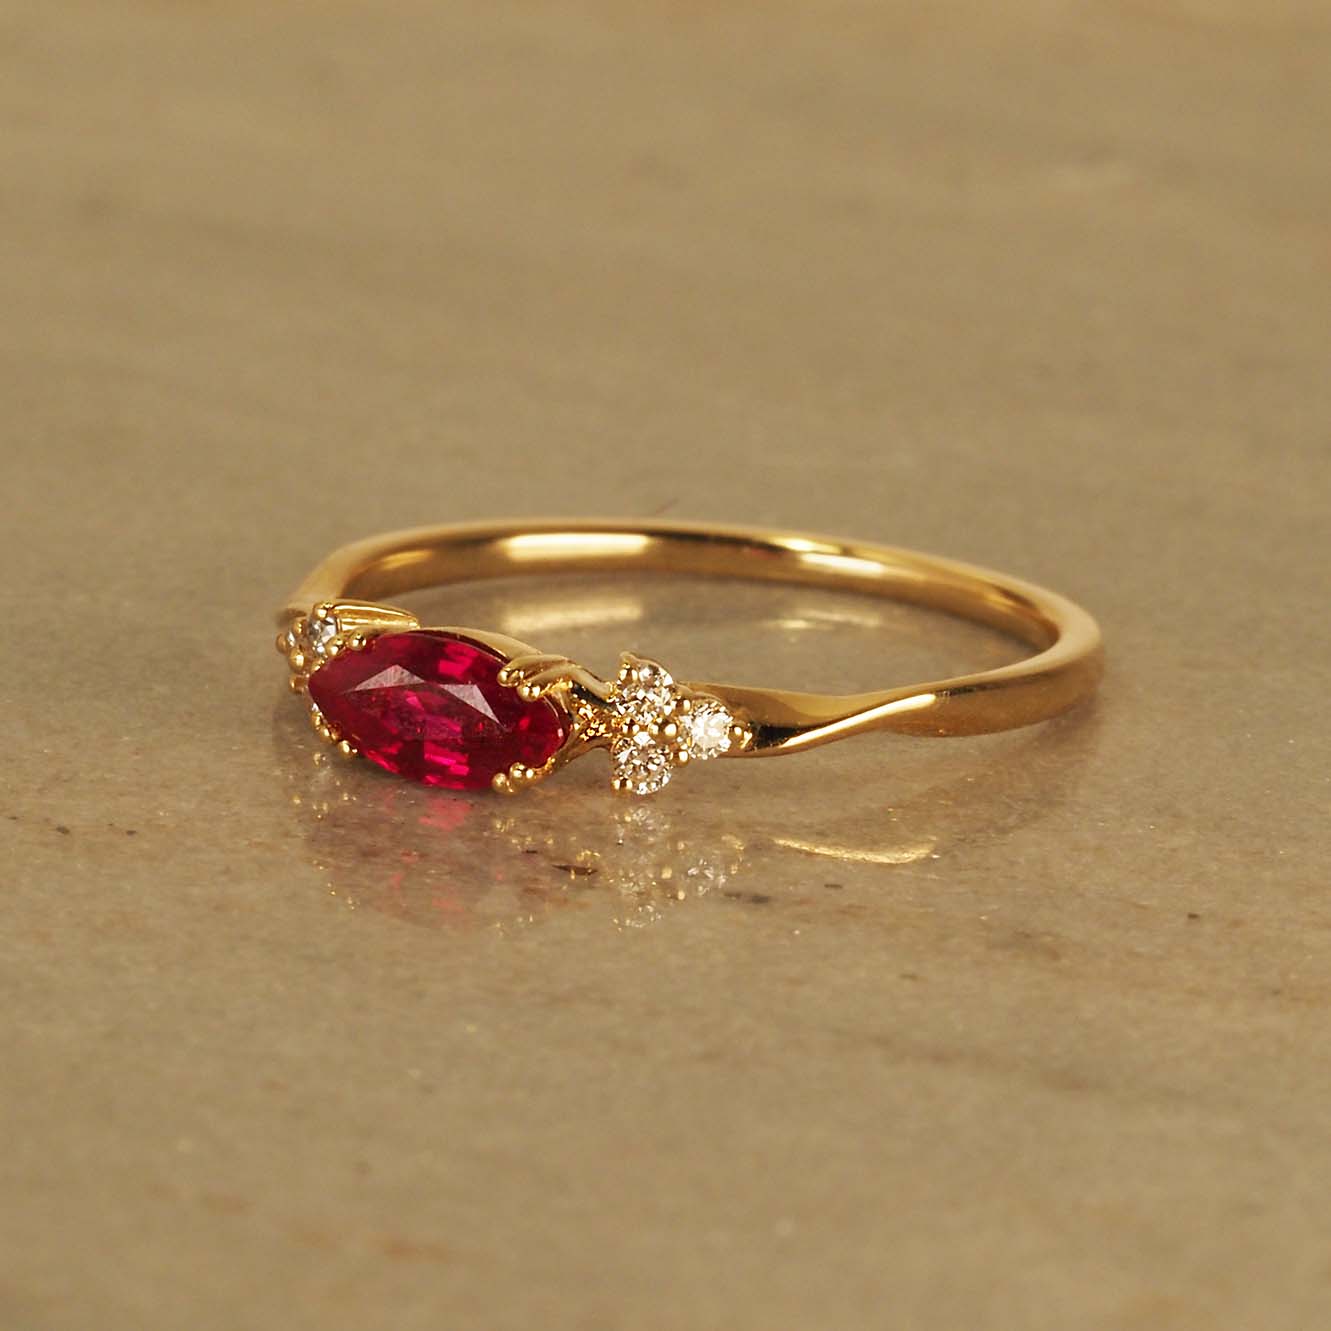 The Mermaid Ring with Ruby